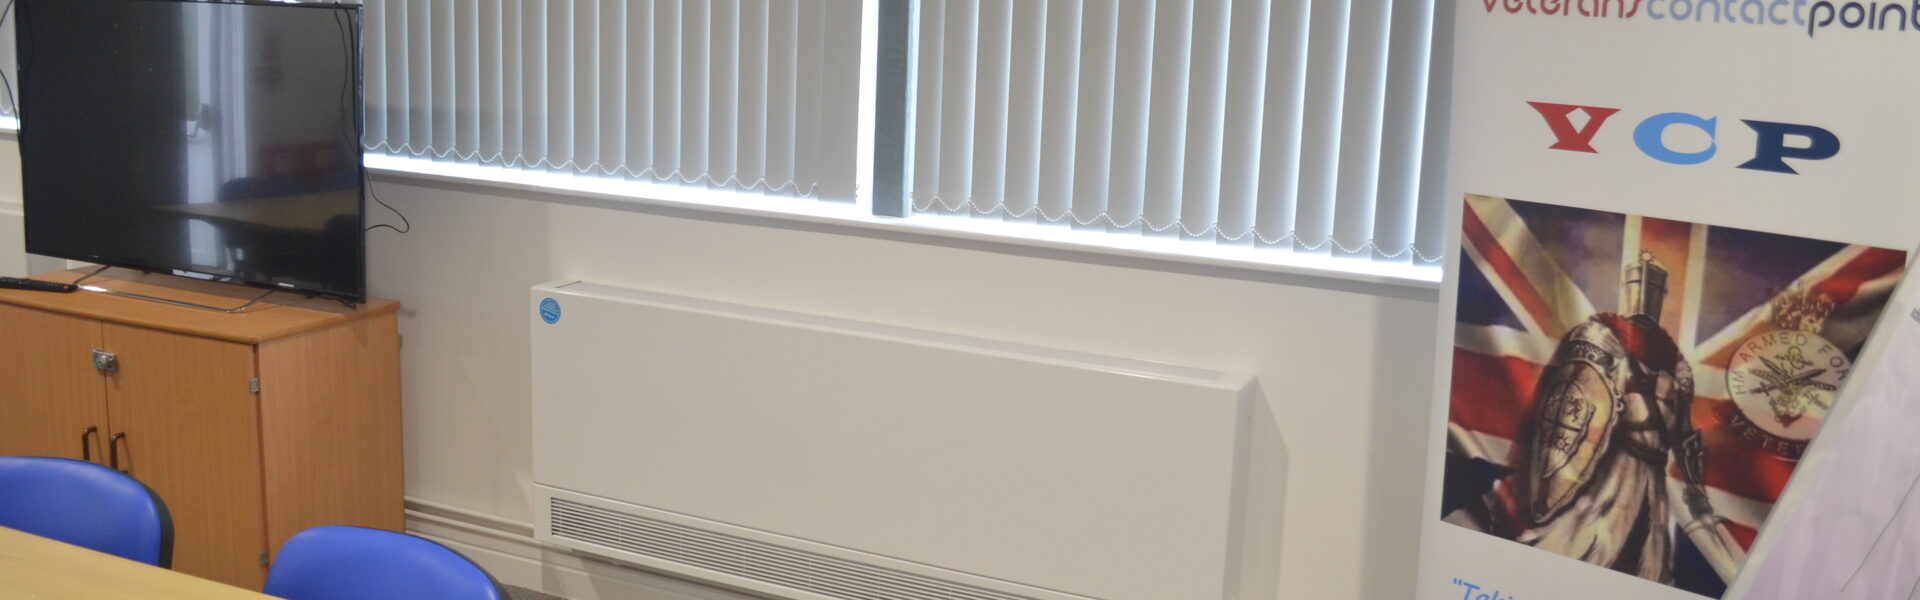 Stelrad Radiator at Forth Valley College 5